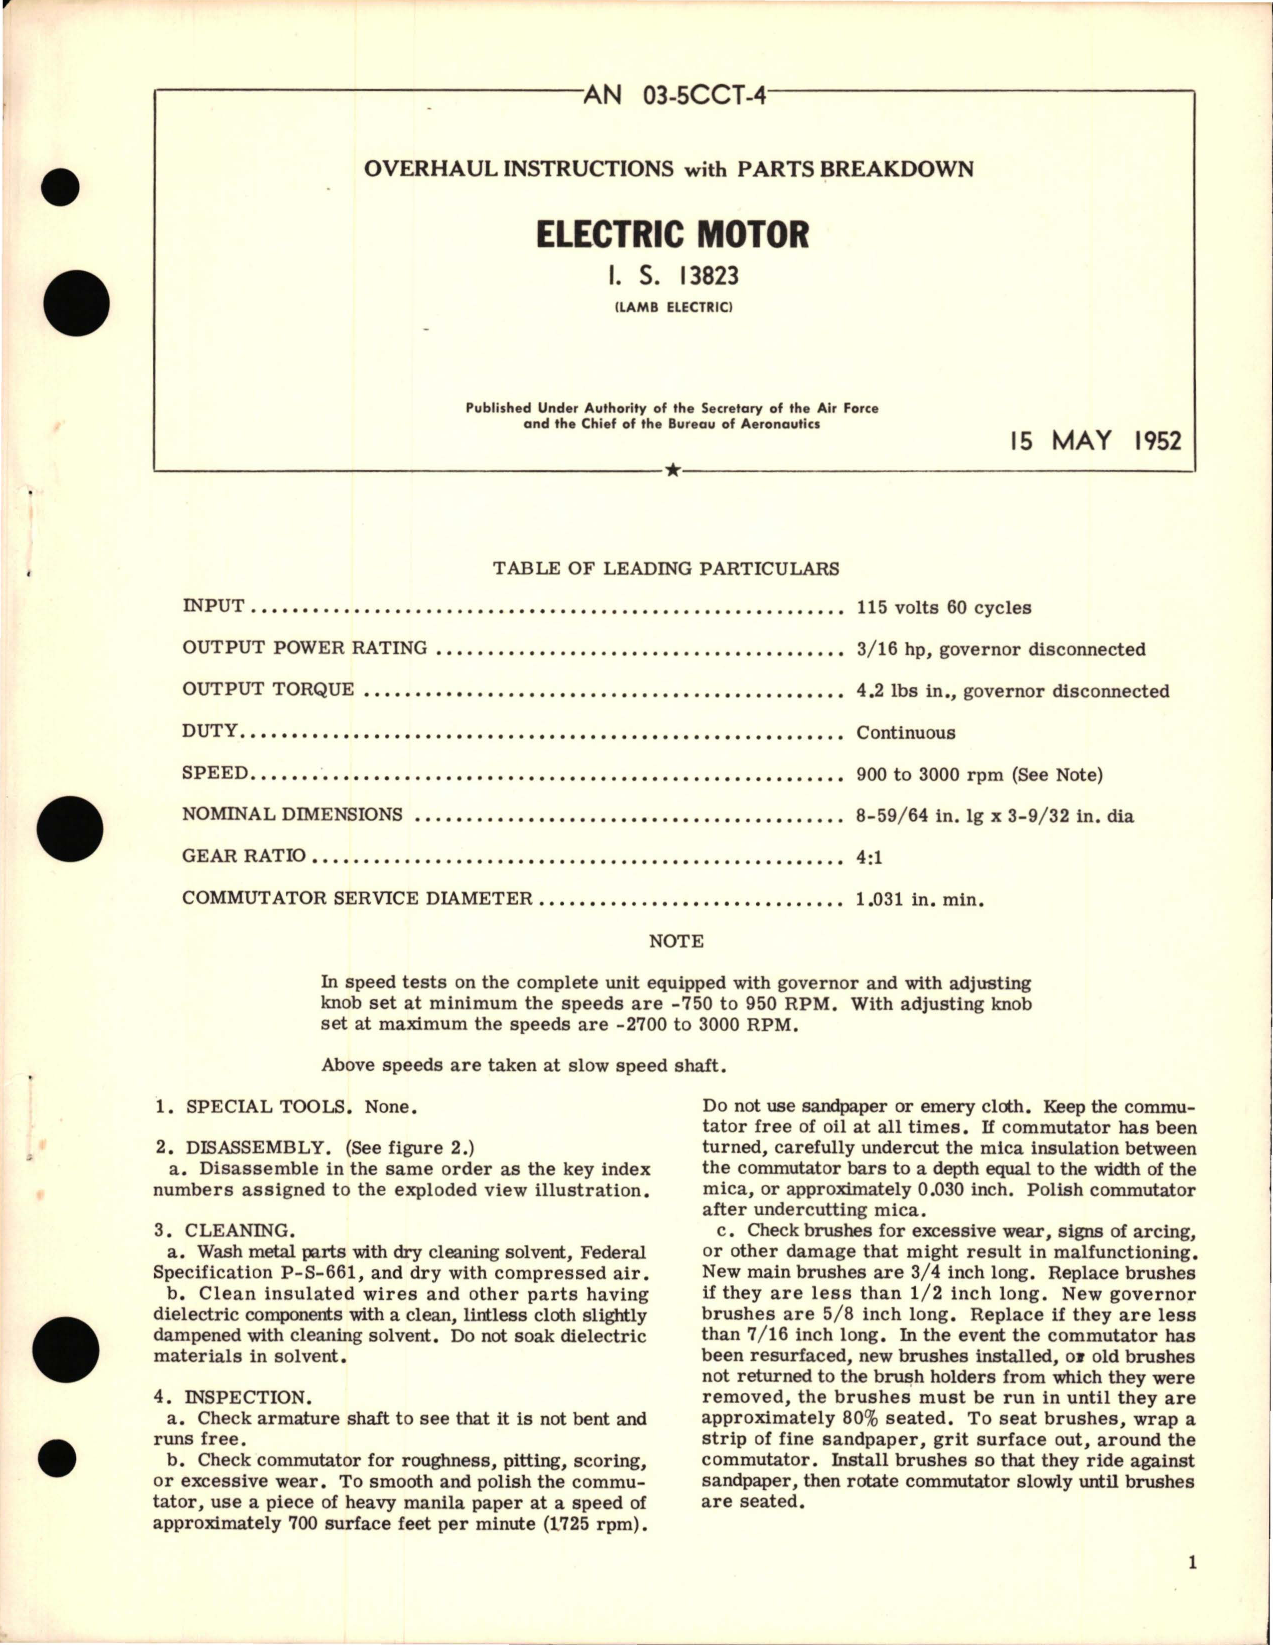 Sample page 1 from AirCorps Library document: Overhaul Instructions for Electric Motor I.S. 13823